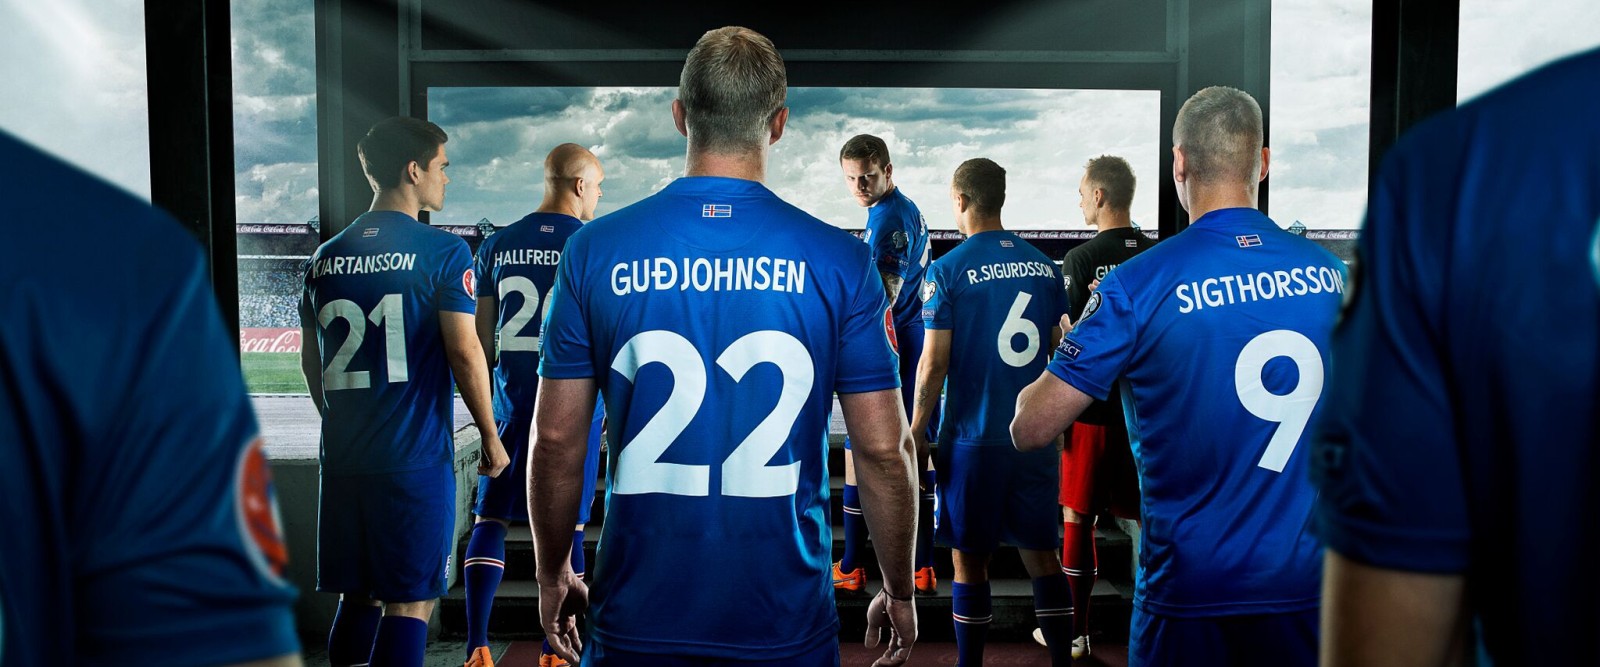 Inside a Volcano - The Rise of Icelandic Football